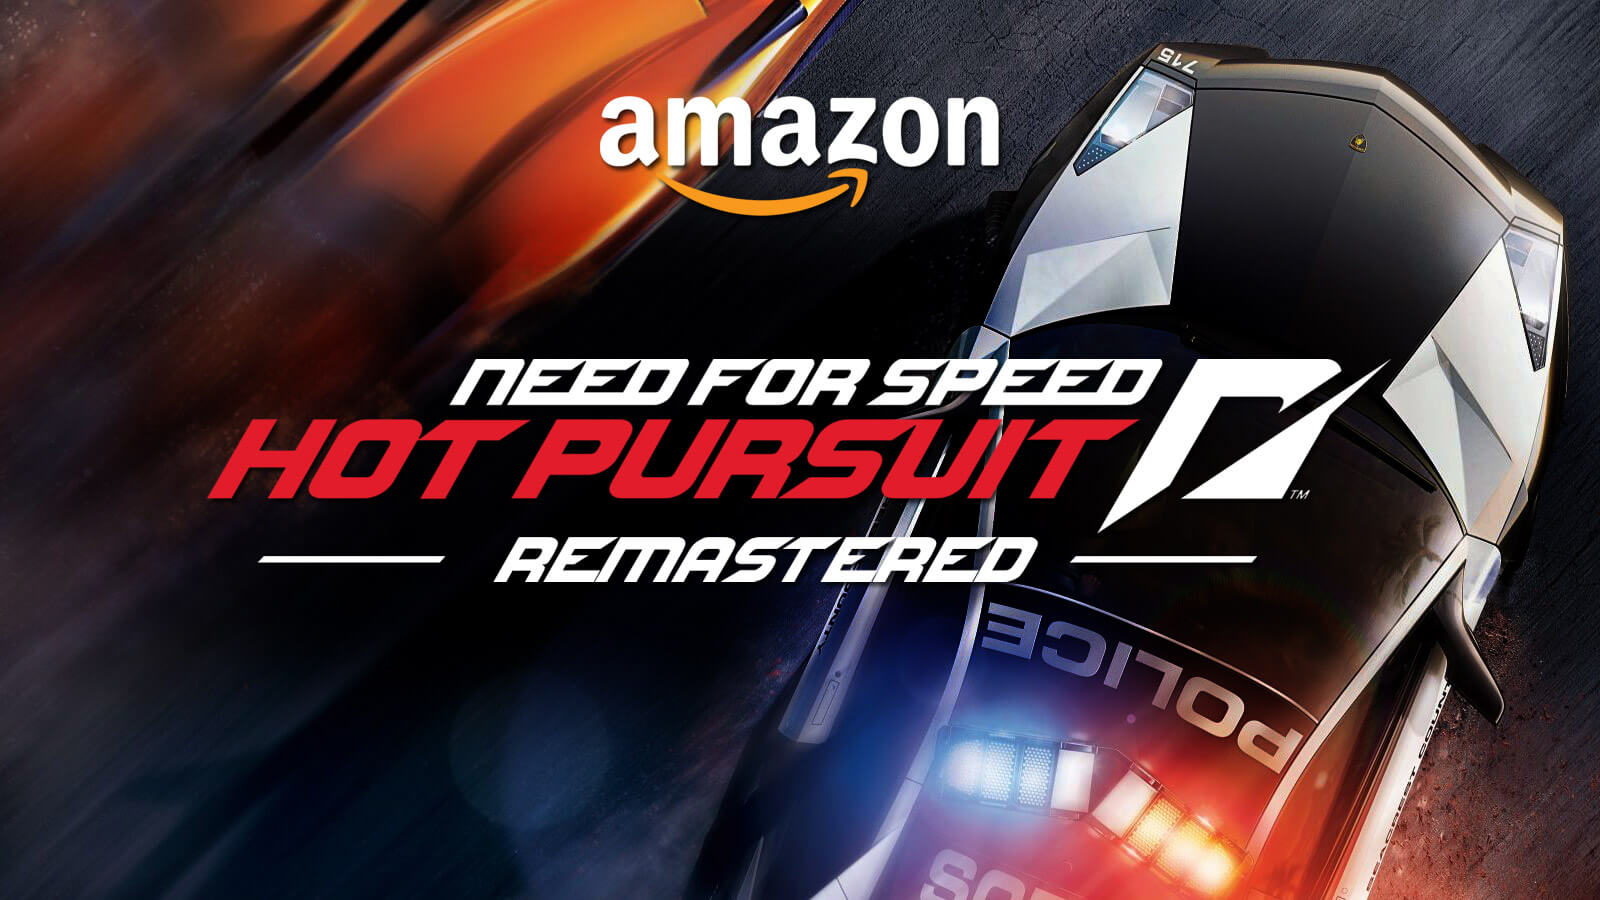 Need-for-Speed-%25E2%2580%2593-Hot-Pursuit-Remastered-Leaked-on-Amazon.jpg